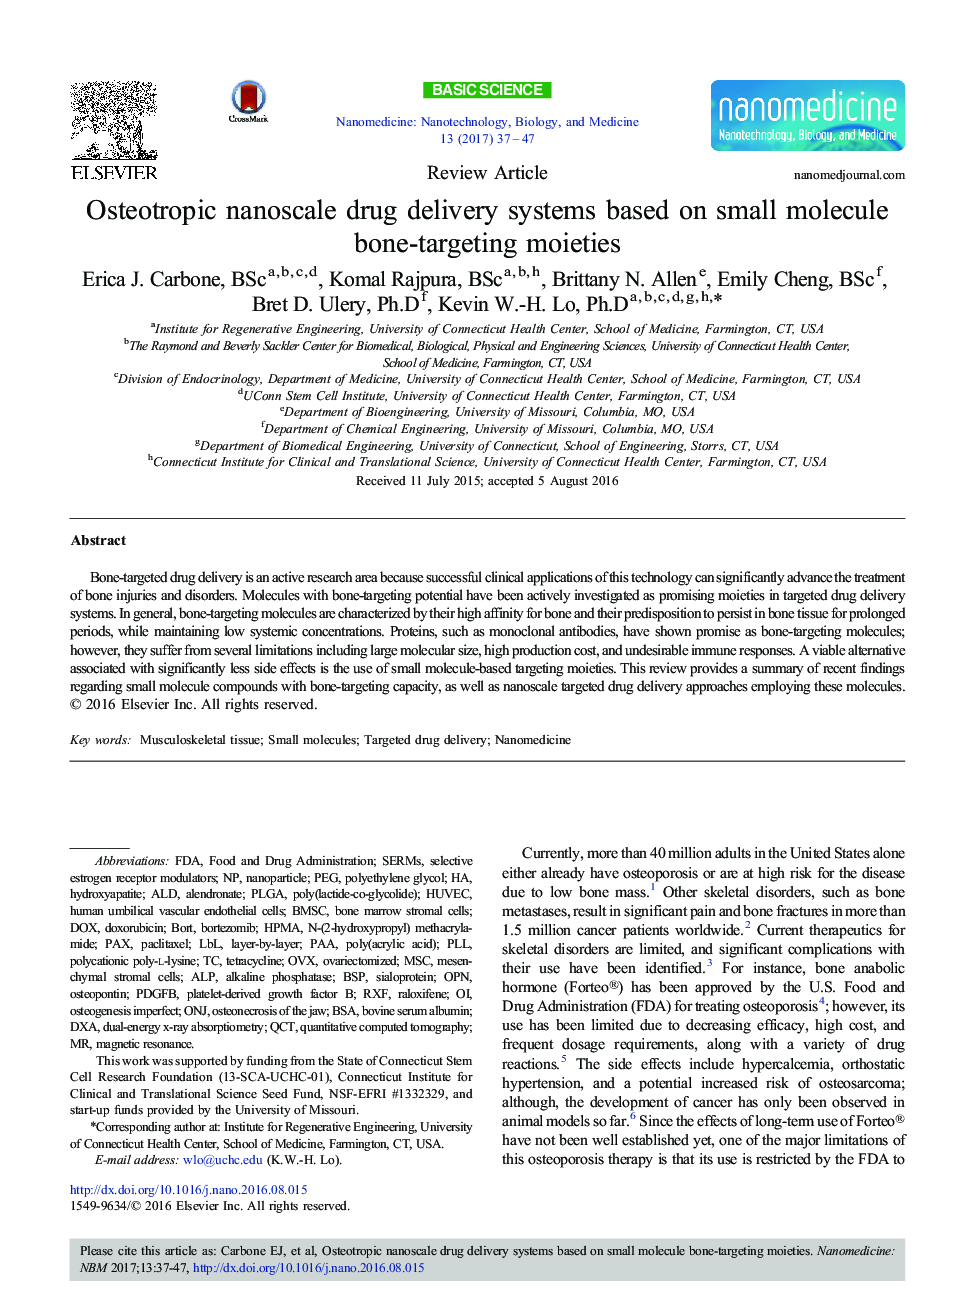 Osteotropic nanoscale drug delivery systems based on small molecule bone-targeting moieties